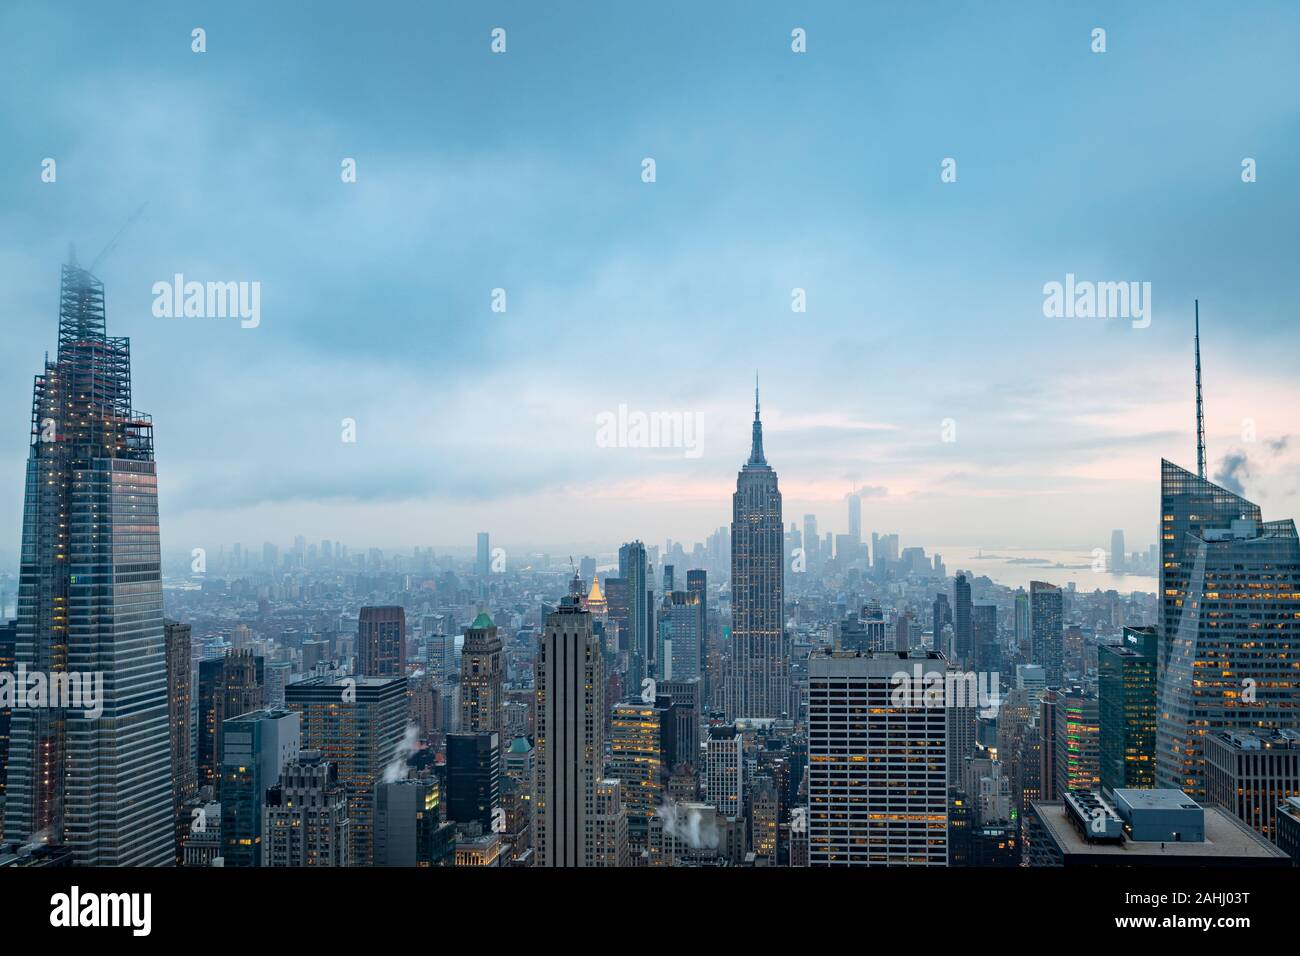 New York skyline  from Top of The Rock at sunset with clouds in the sky. Stock Photo